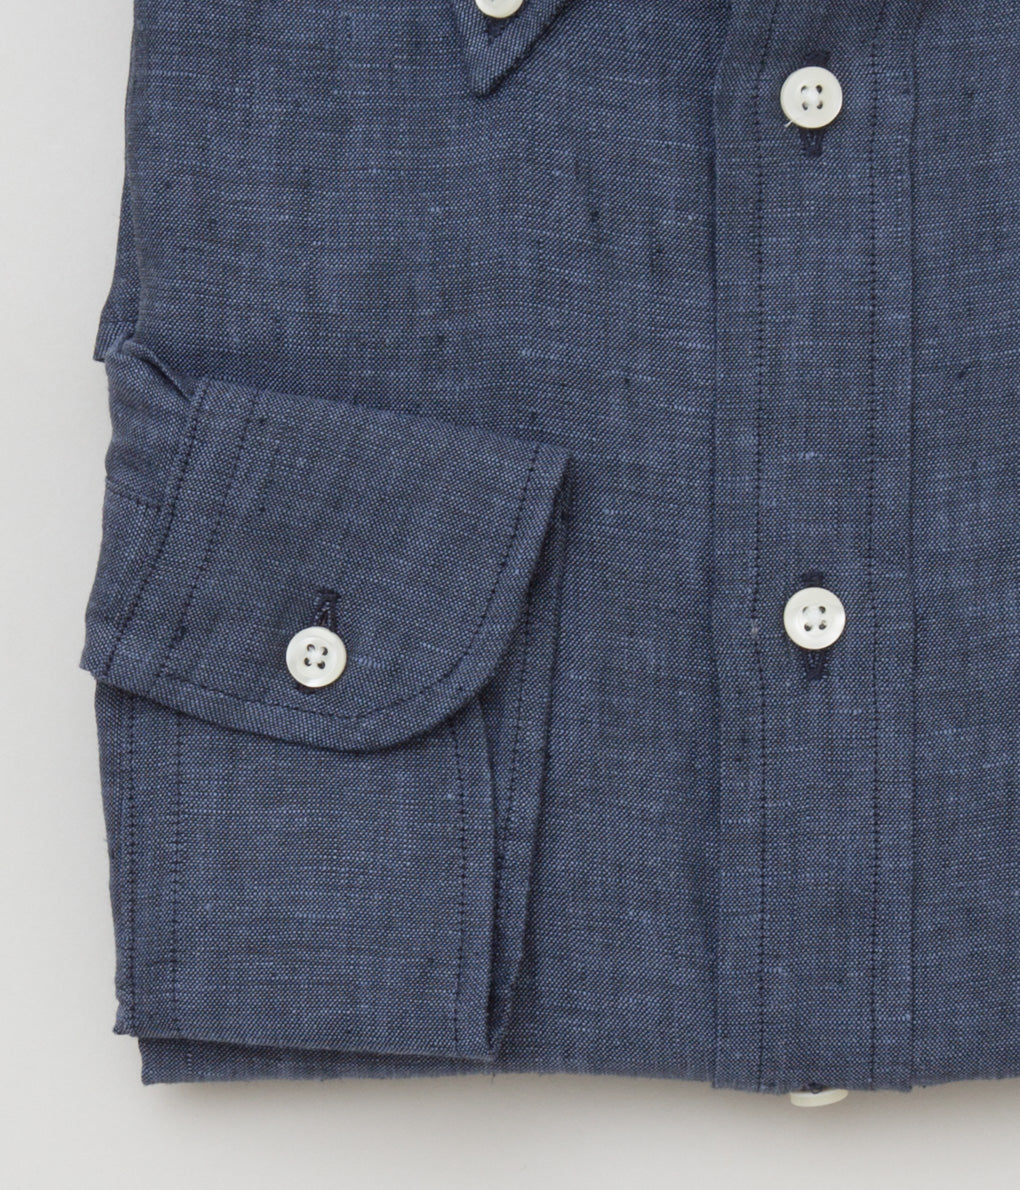 INDIVIDUALIZED SHIRTS "LINEN (CLASSIC FIT BUTTON DOWN SHIRT)" (NAVY)